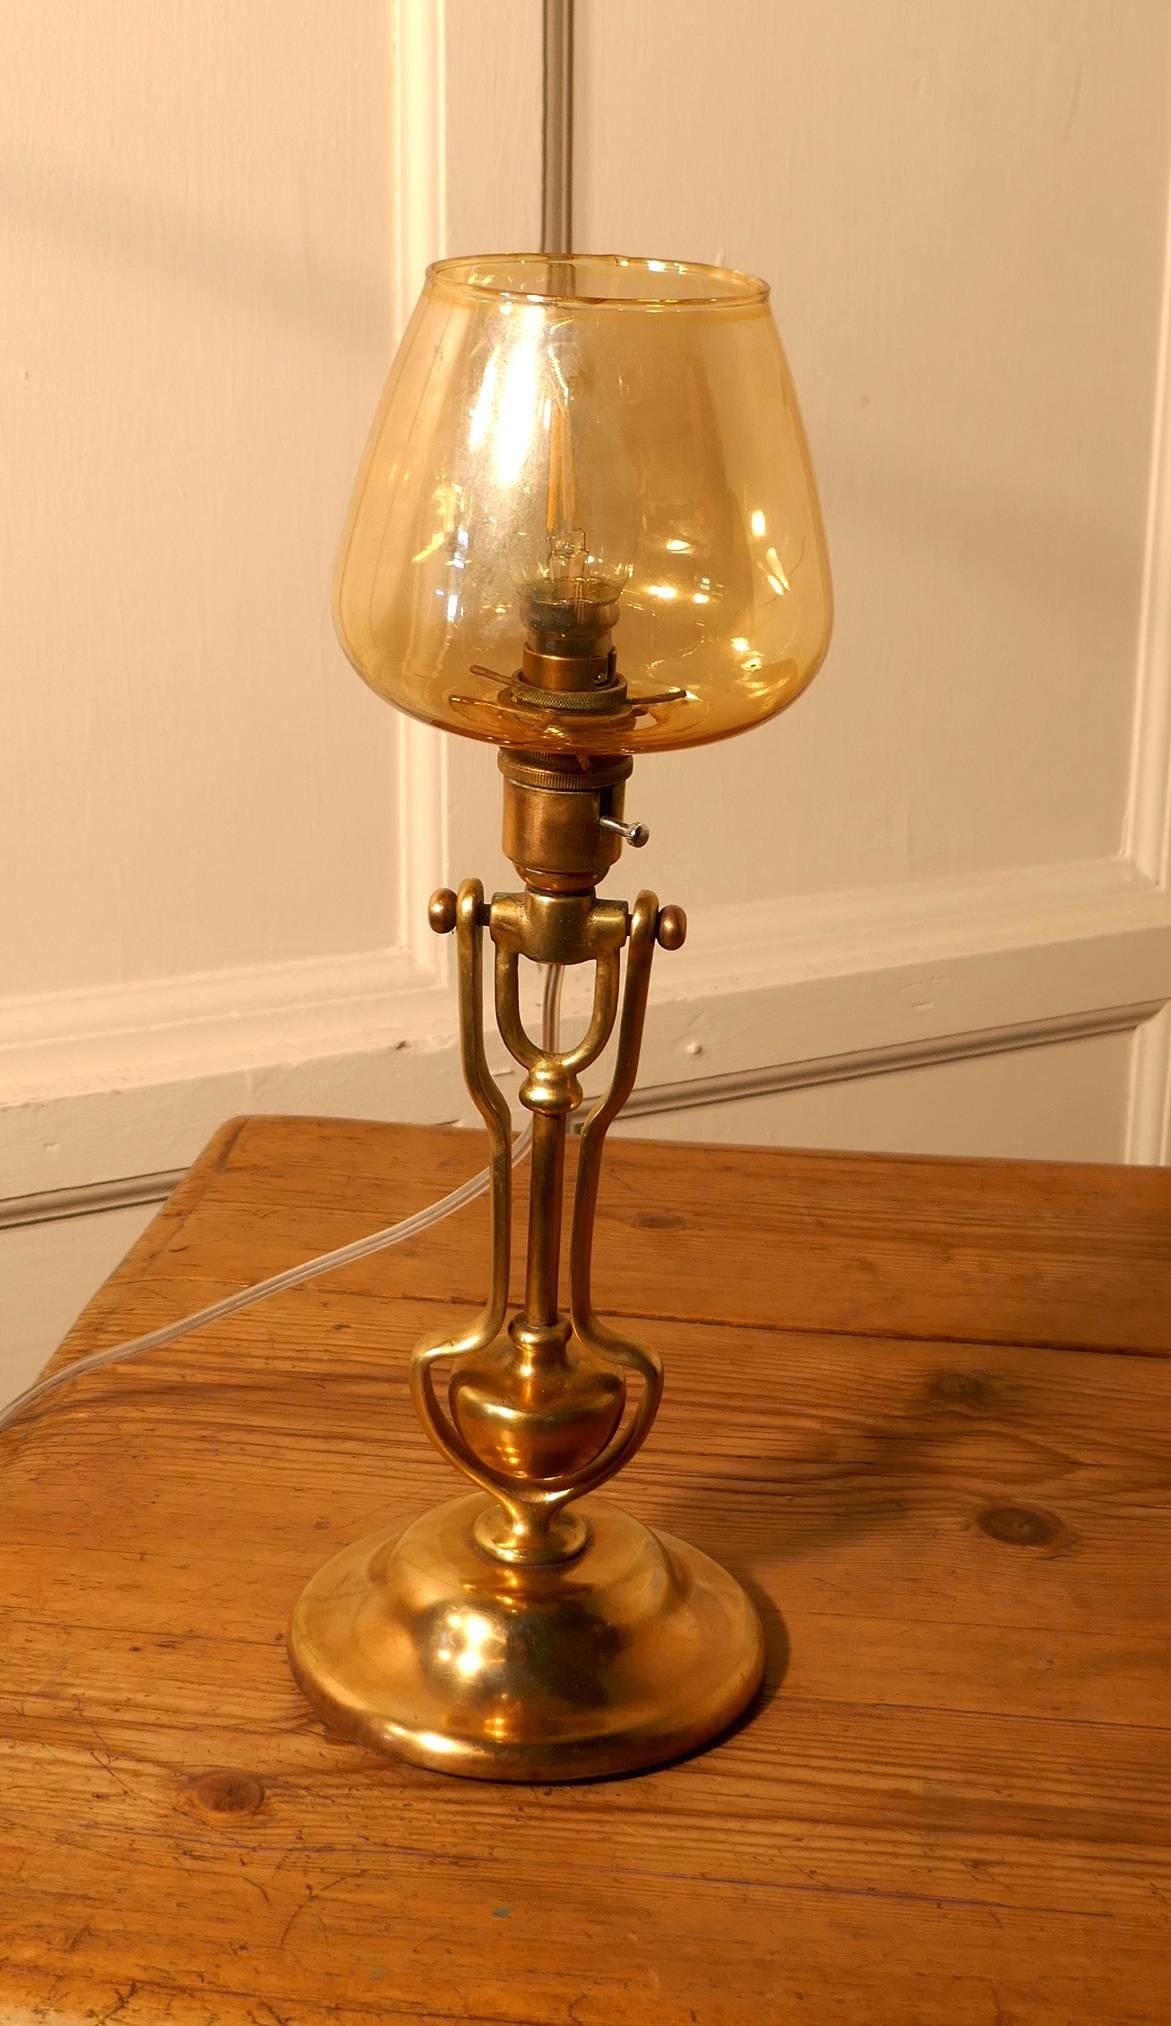 Brass gimbal ships lamp, wall hung or table lamp.

This is a very attractive piece, the lamp originated from a boat, it has a gimbal action which when the boat sways from time to time the original oil lamp would remain upright. The oil lamp has